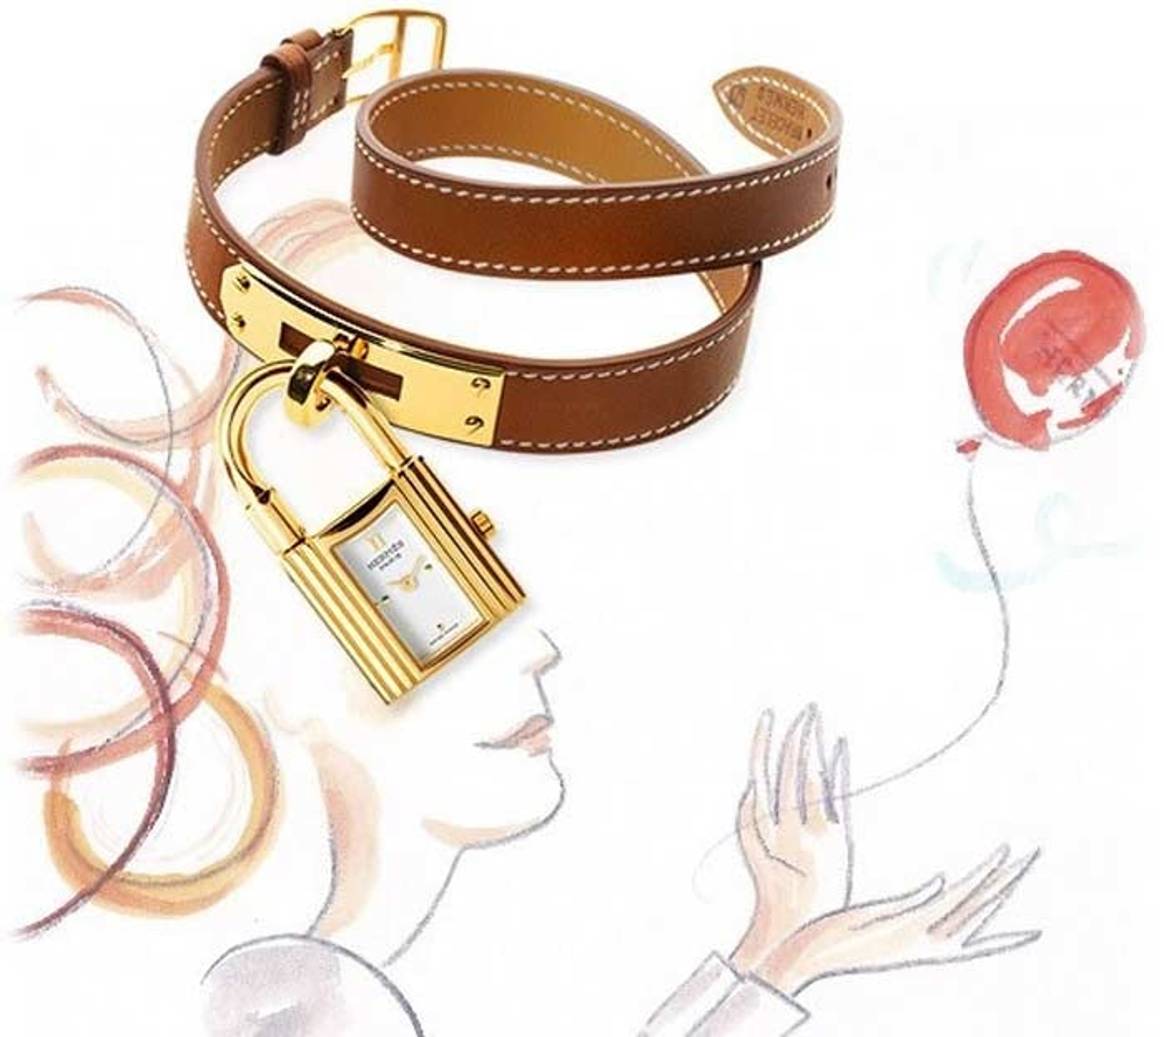 Laurent Dordet: 'Women are the future of Hermes Watches'